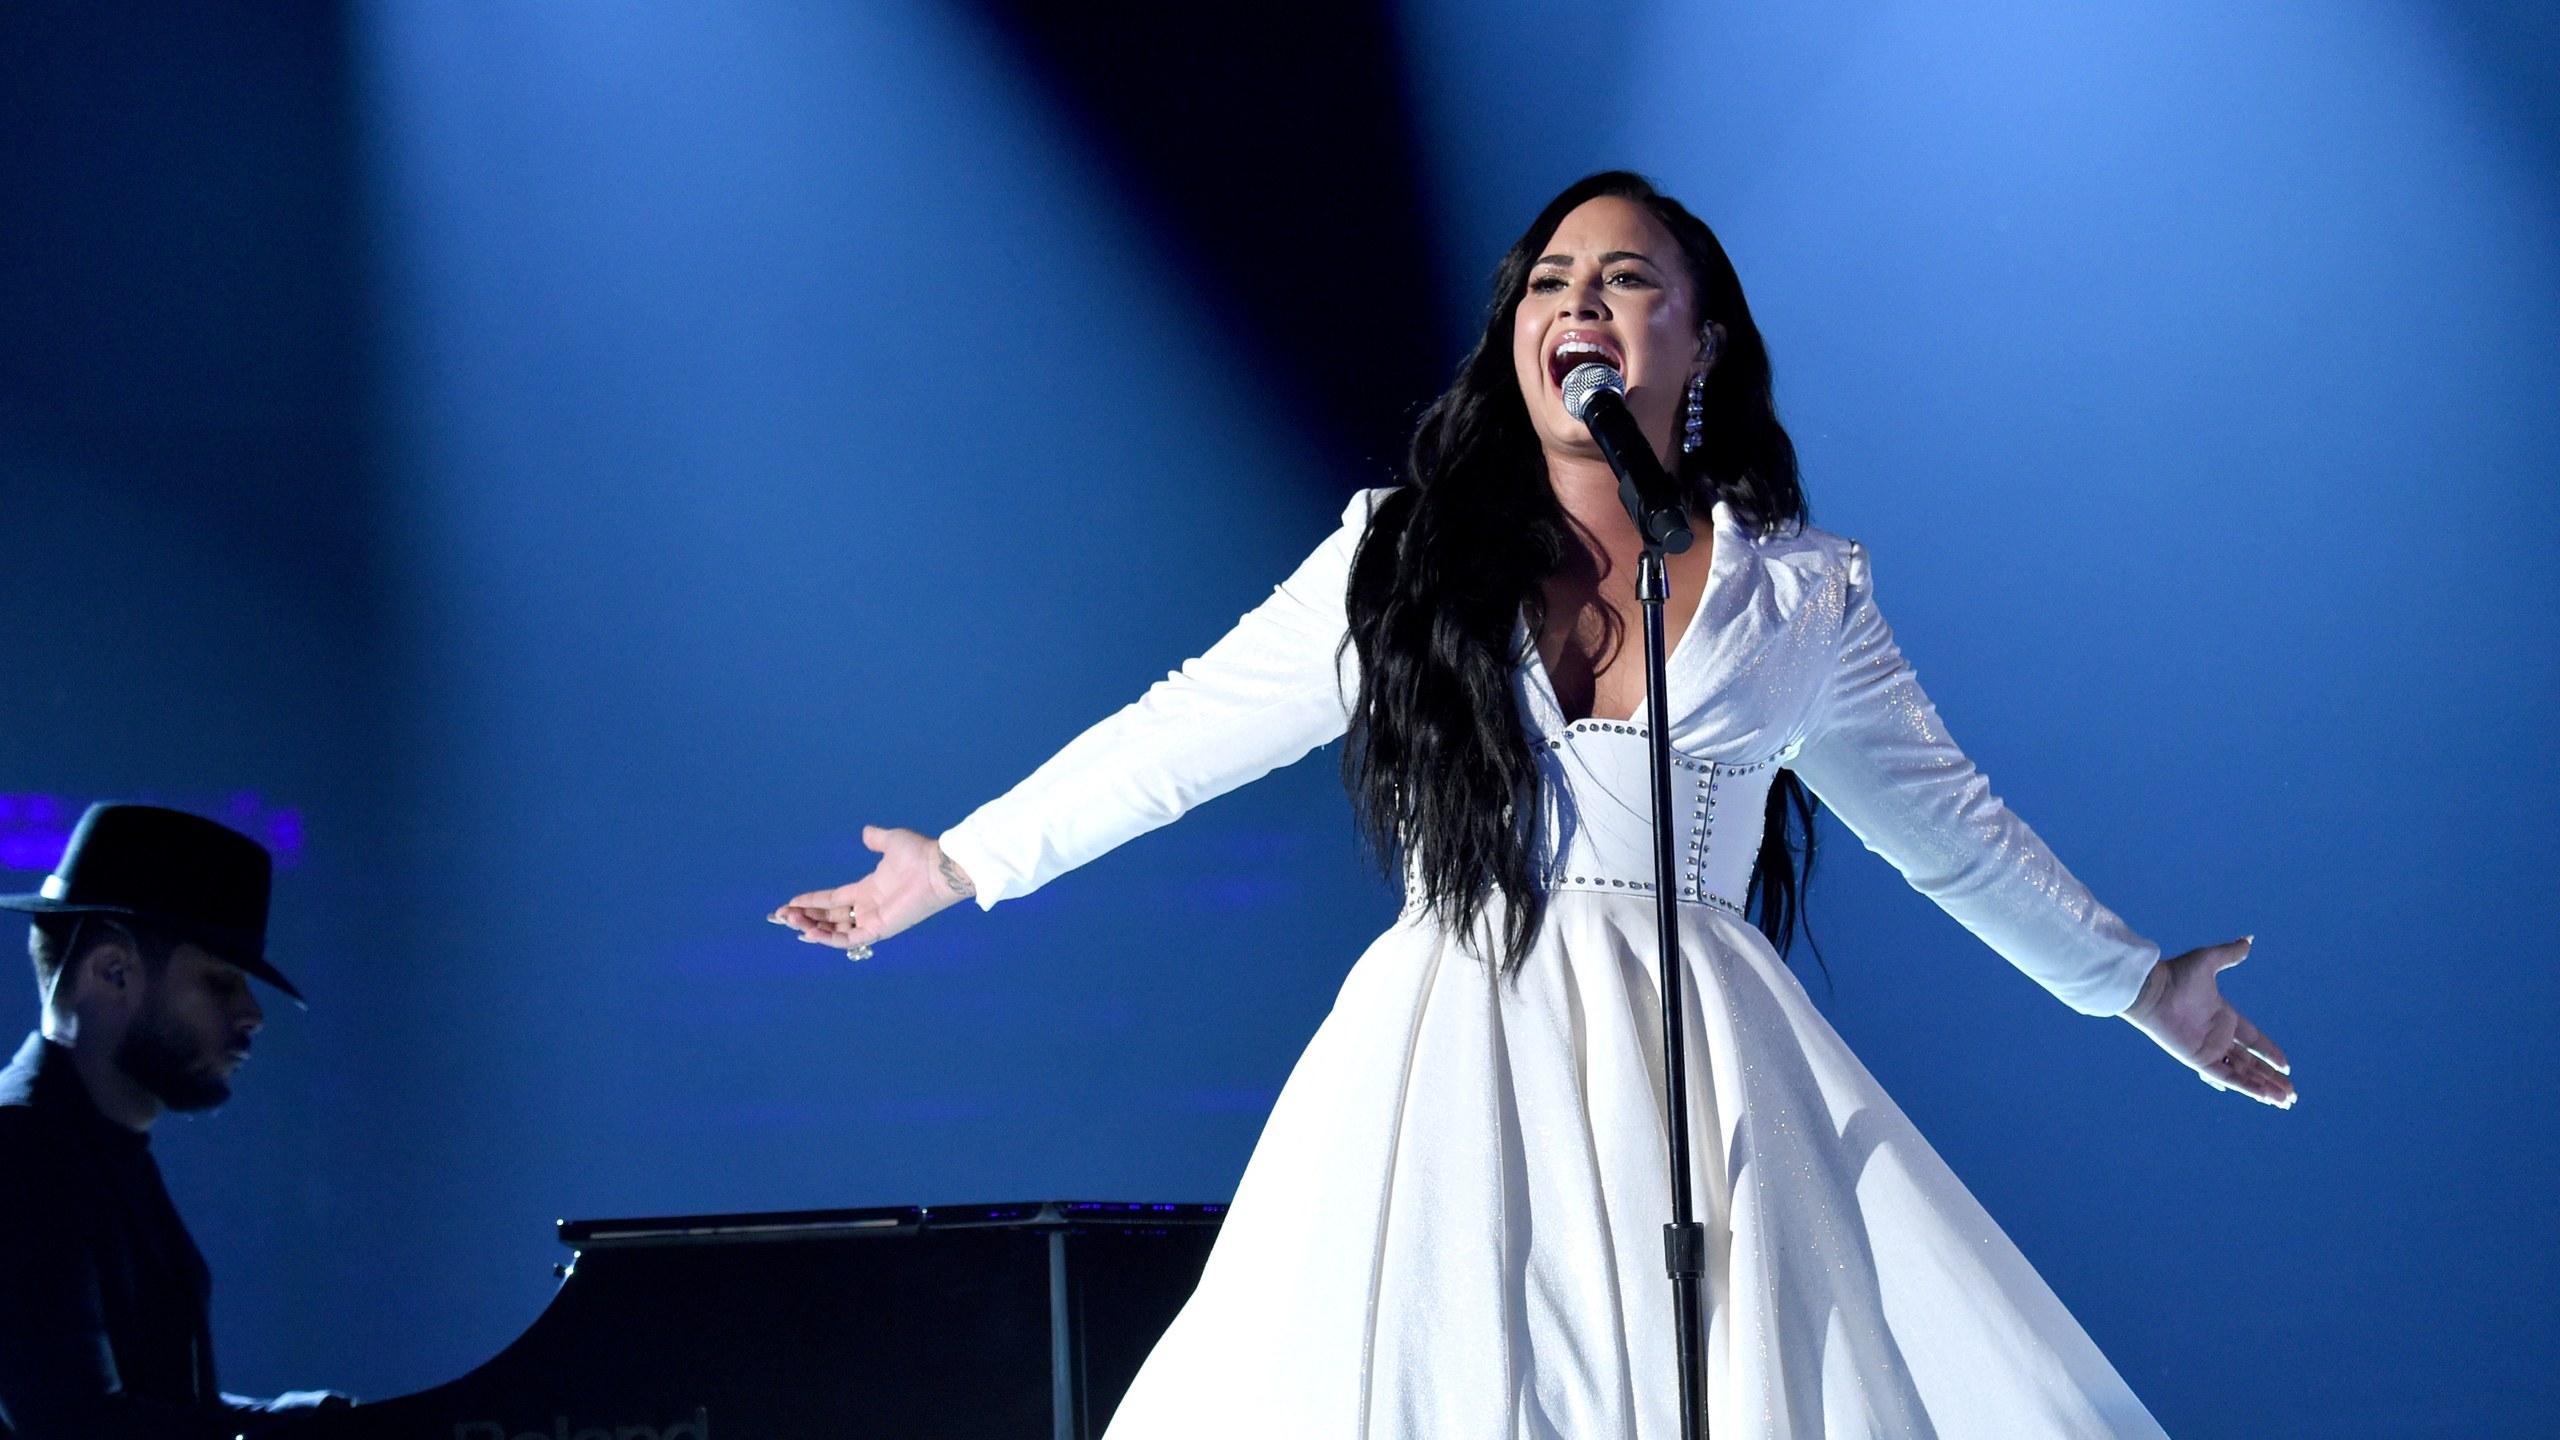 Demi Lovato Looked Stunning Performing at the Grammys 2020